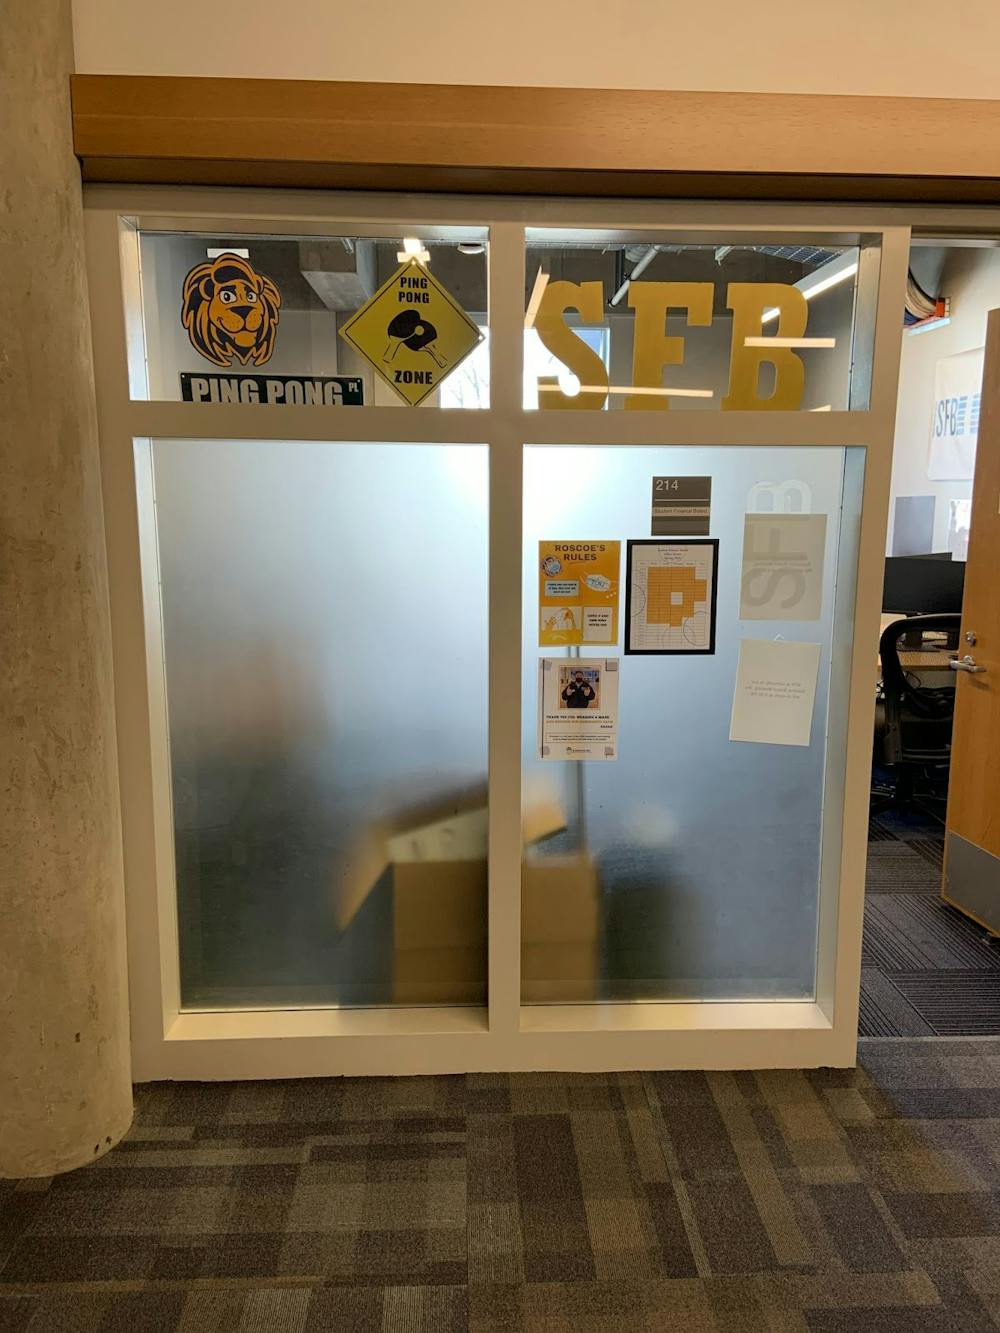 <p><em>The SFB office is located in the Brower Student Center on the second floor, where board members can be found during office hours (Rishi Shah / Director of Operations). </em><br/><br/></p>